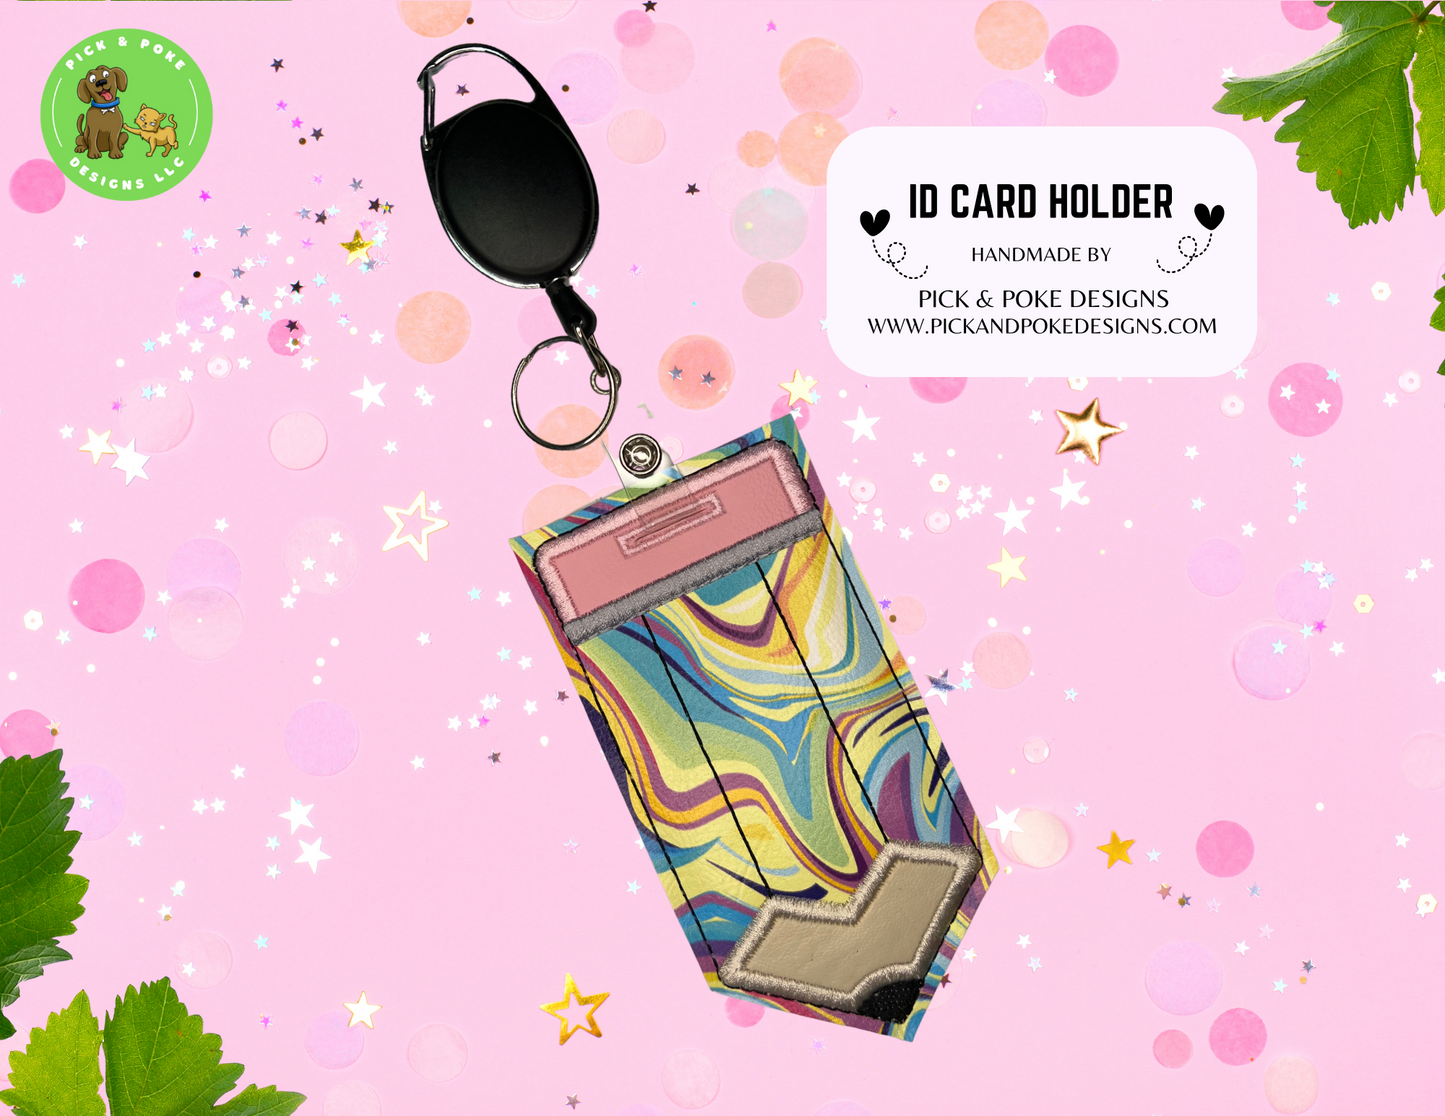 Pencil ID Card Badge Holder with Reel or Clip | Trippy Swirls Design